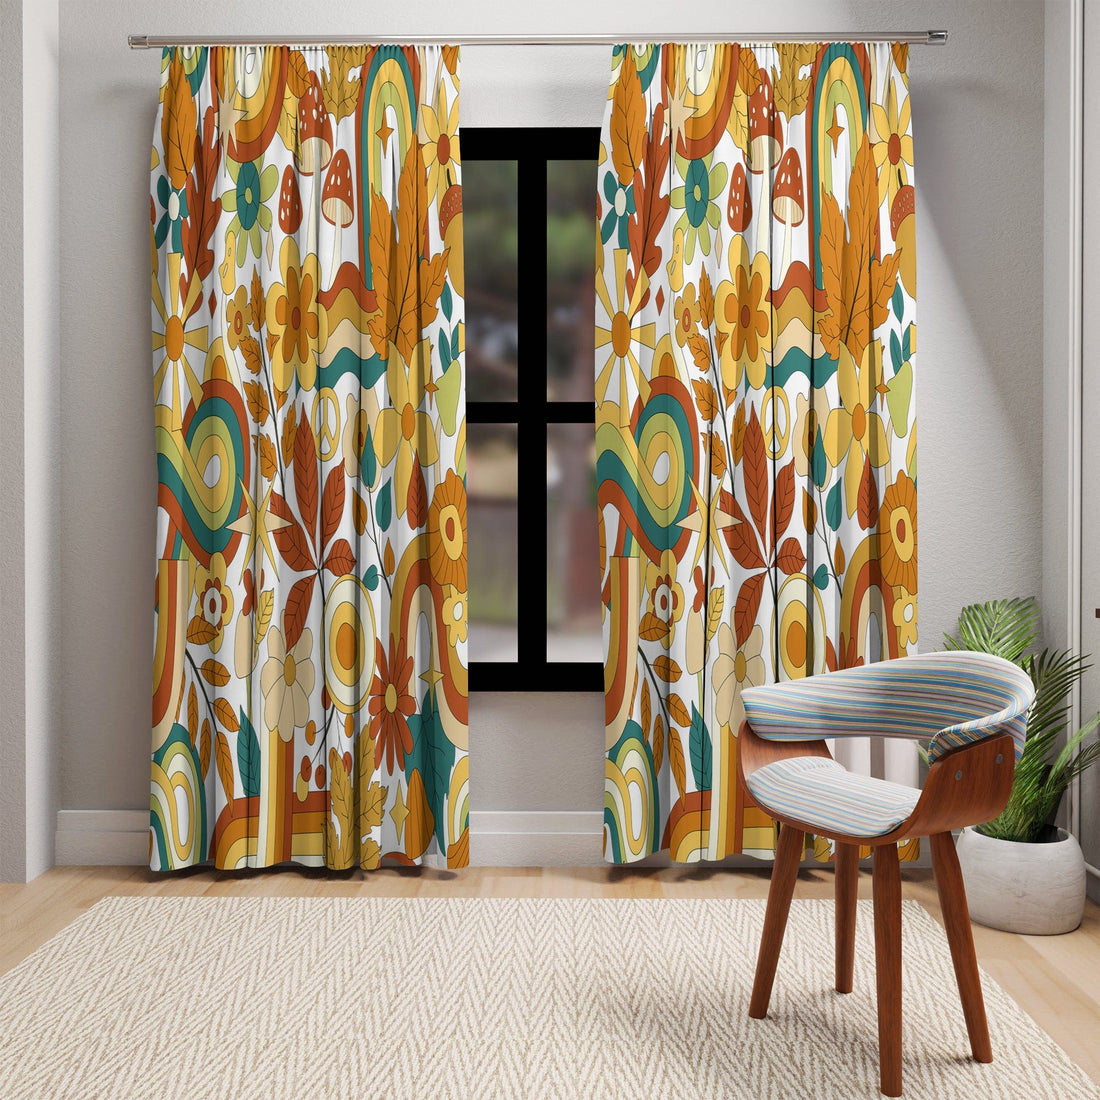 Kate McEnroe New York Window Curtains in 70s Groovy Hippie Retro Floral PrintWindow CurtainsCurtainBlackout - 50x84 - DoublePanel - 20220801014903449